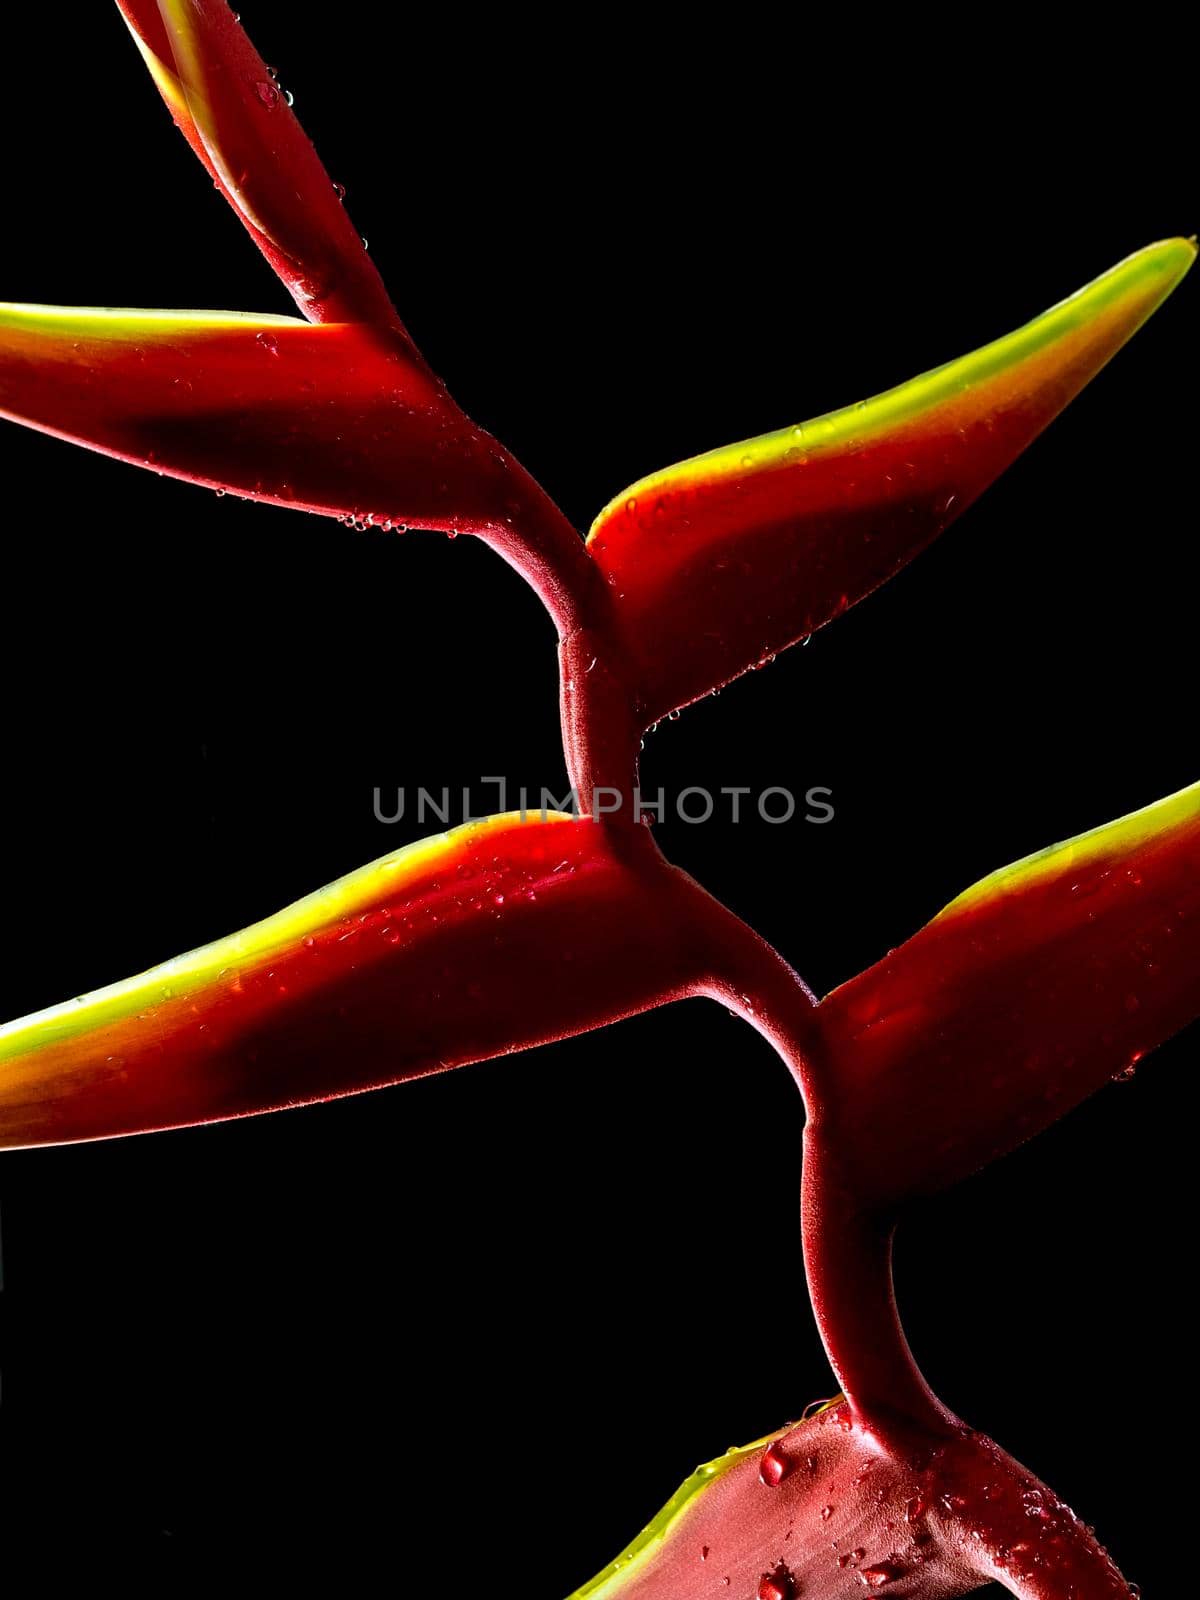 Hanging lobster claws flower in black background